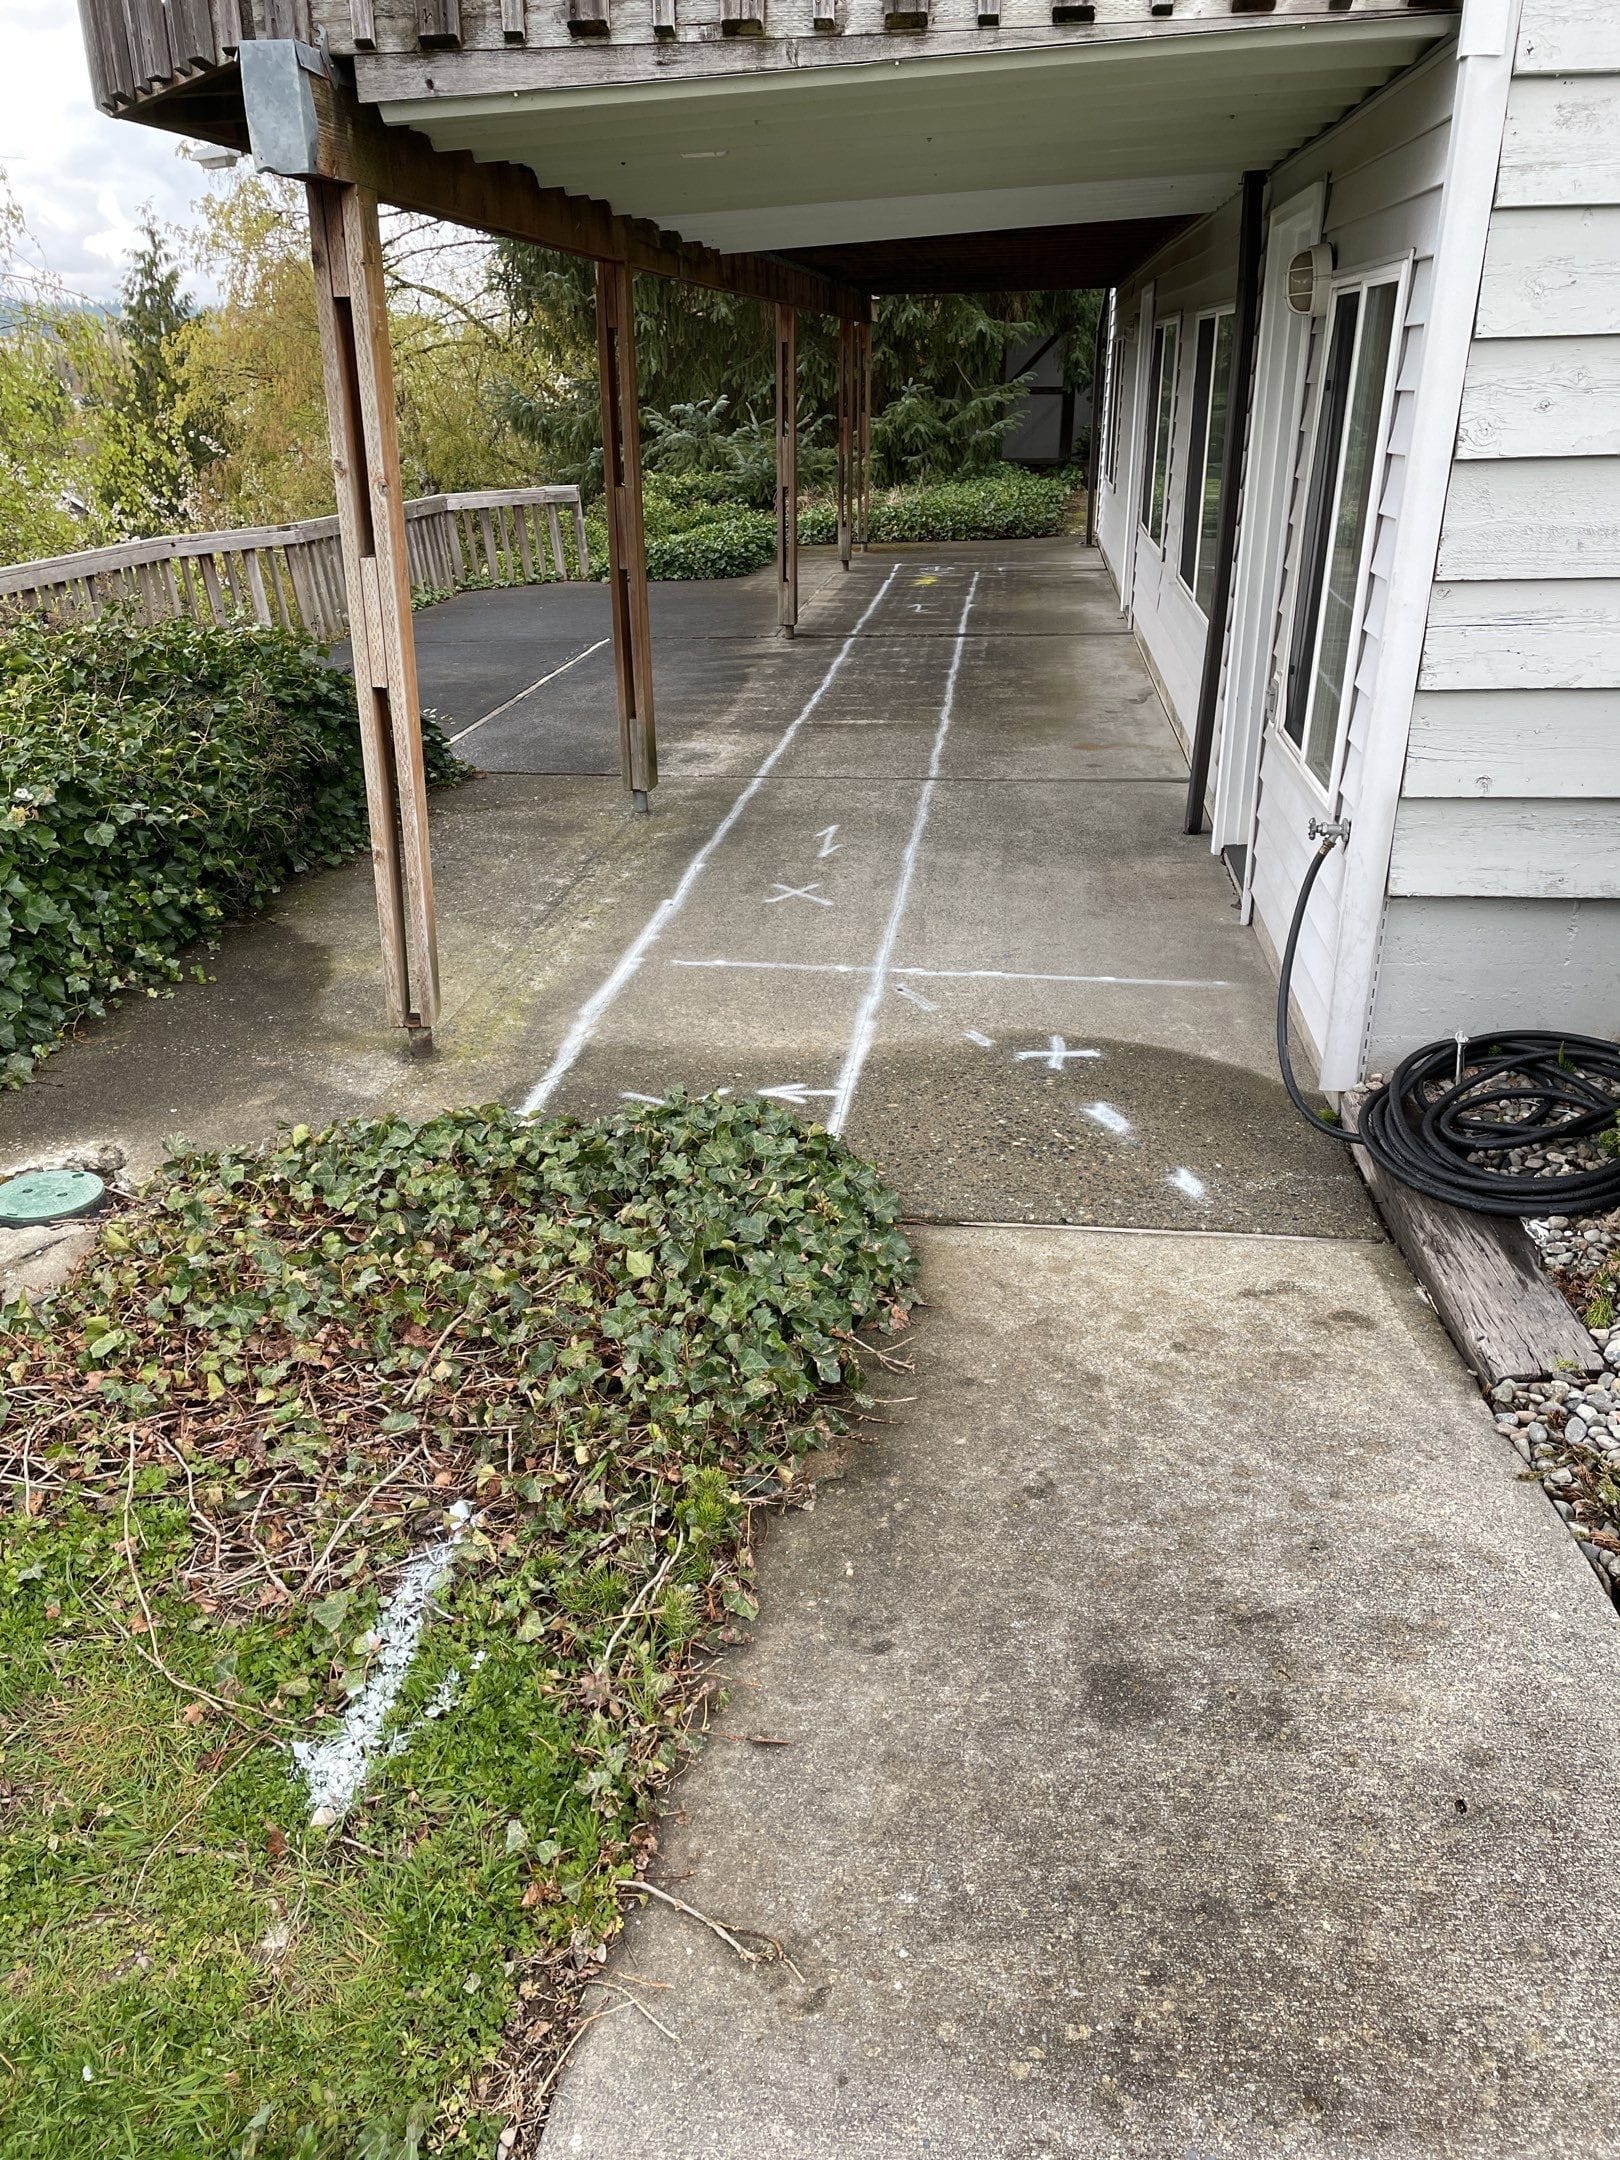 Marking the new sewer location with white paint under the deck.